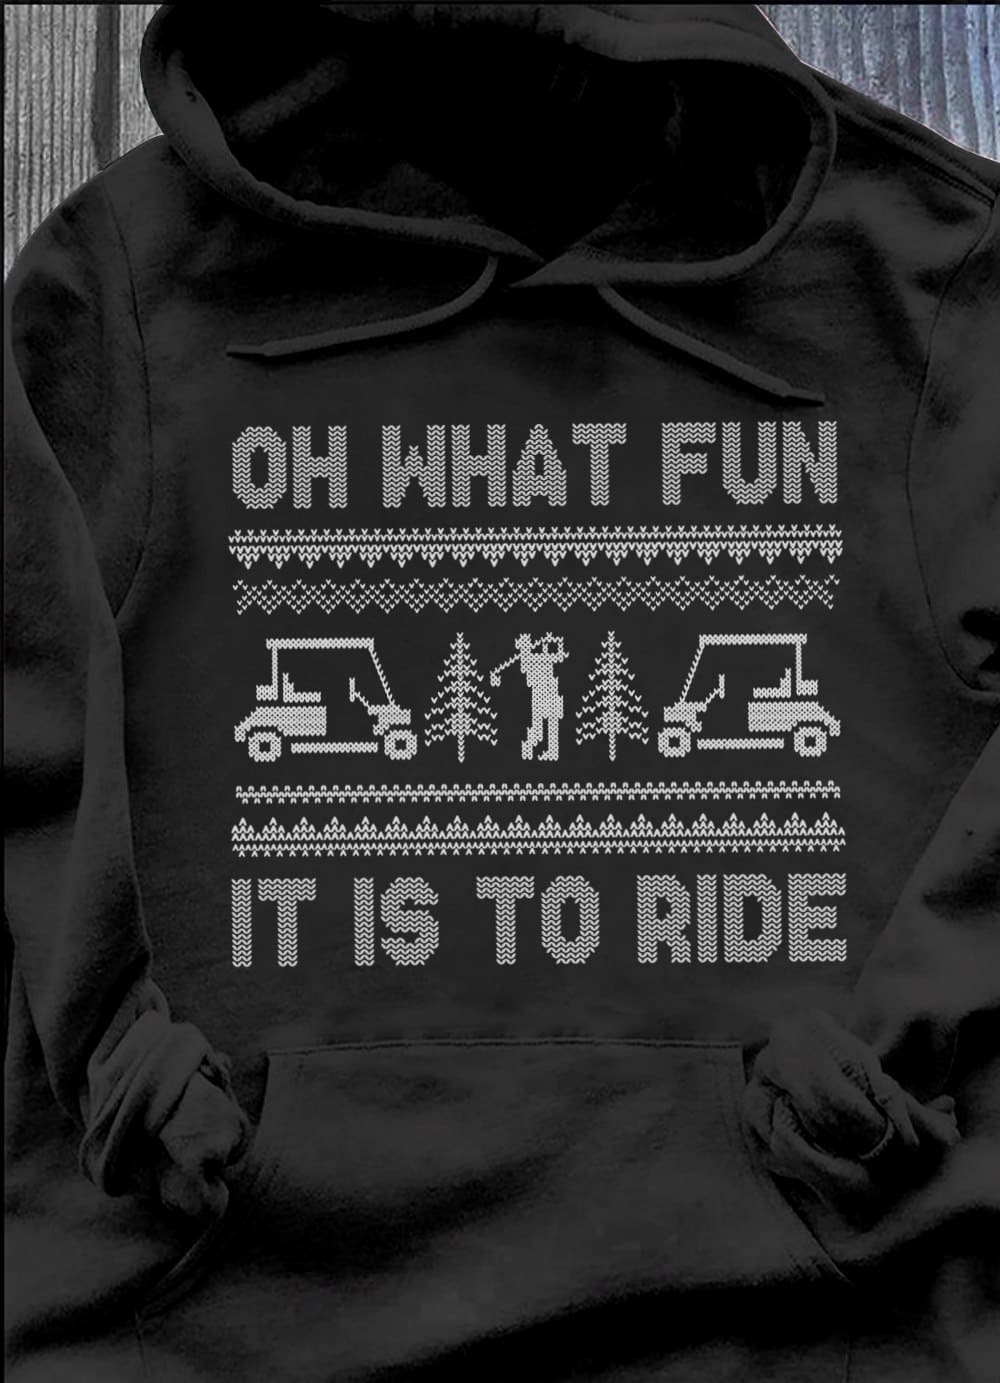 Oh what fun it is to ride - Ride the golf cart, T-shirt of golfers